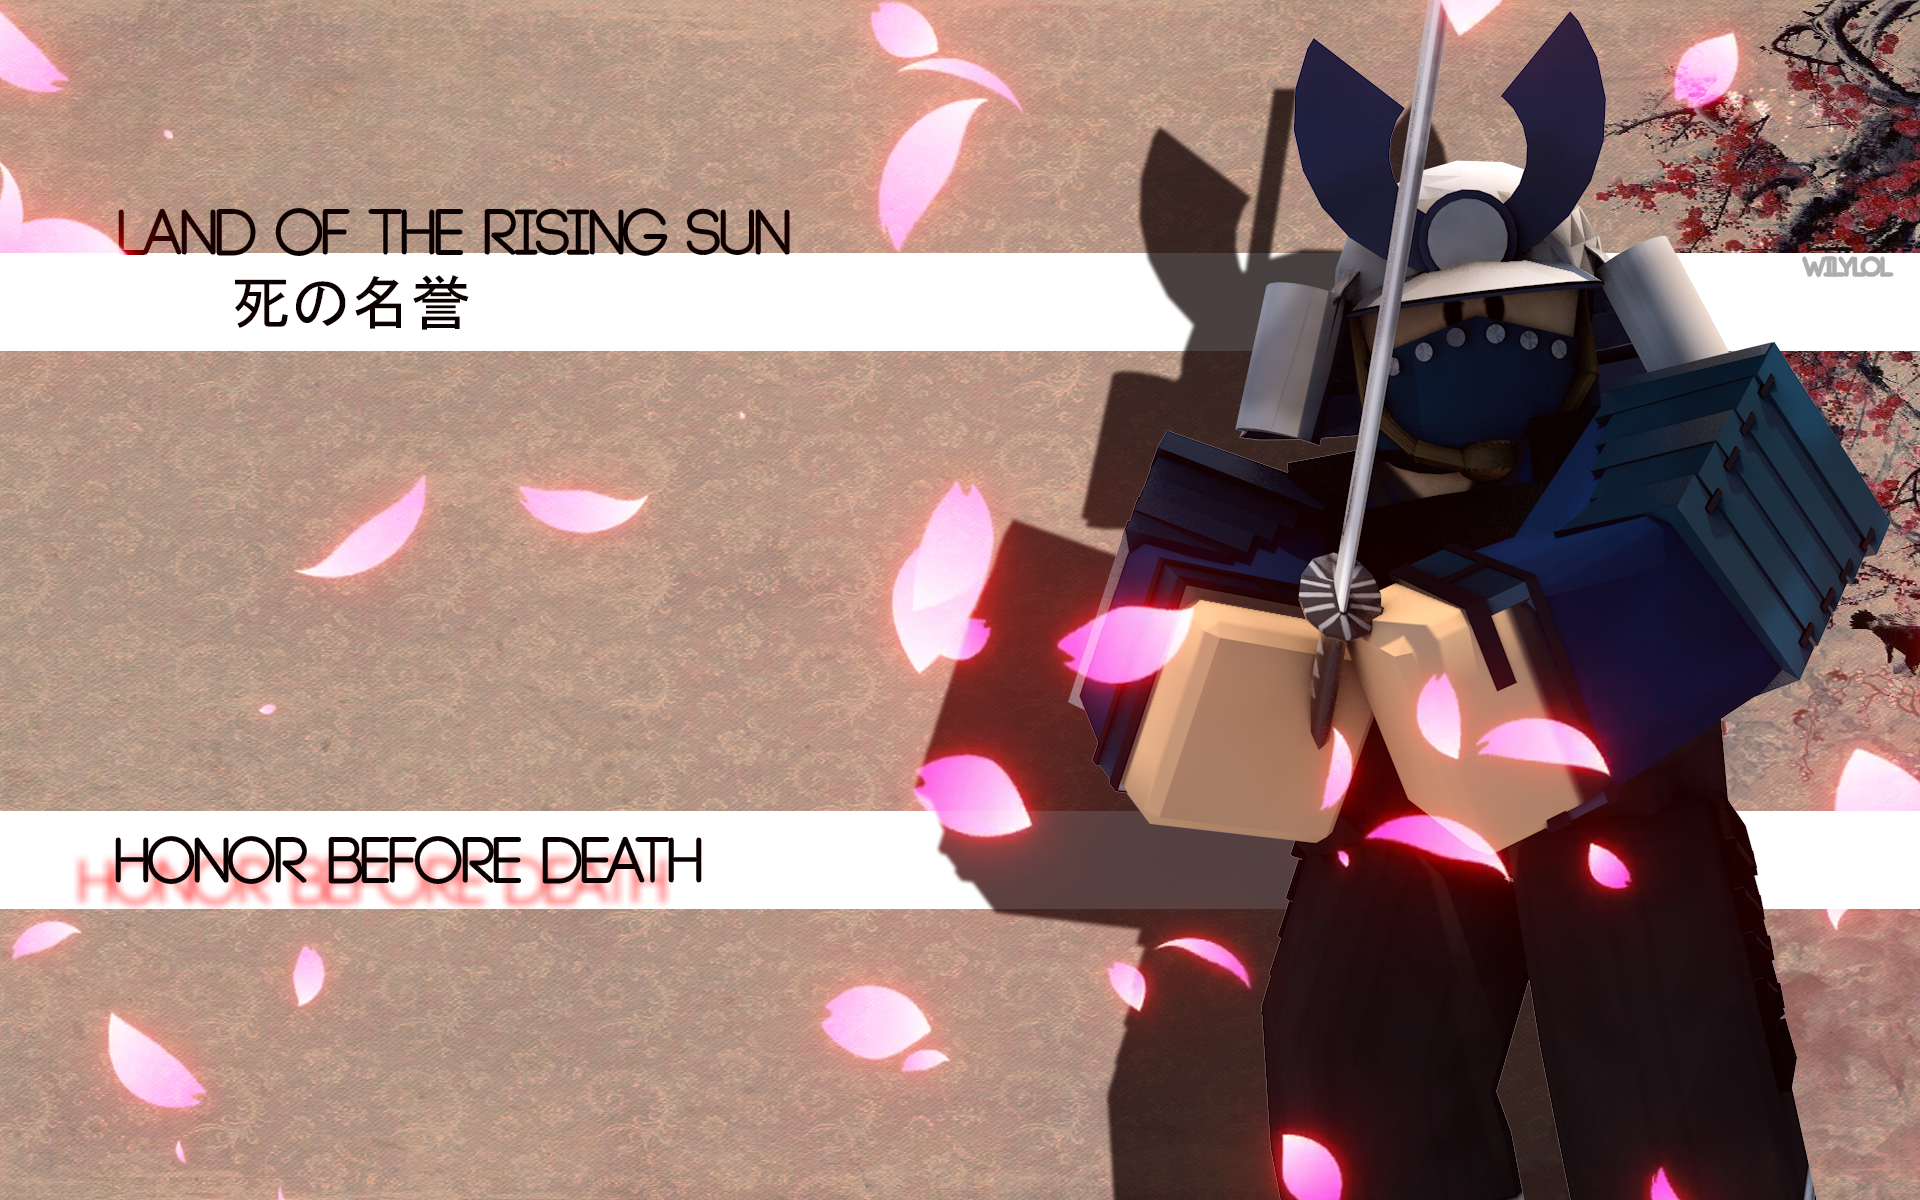 Honor Before Death By Williamm0del On Deviantart - roblox land of the rising sun